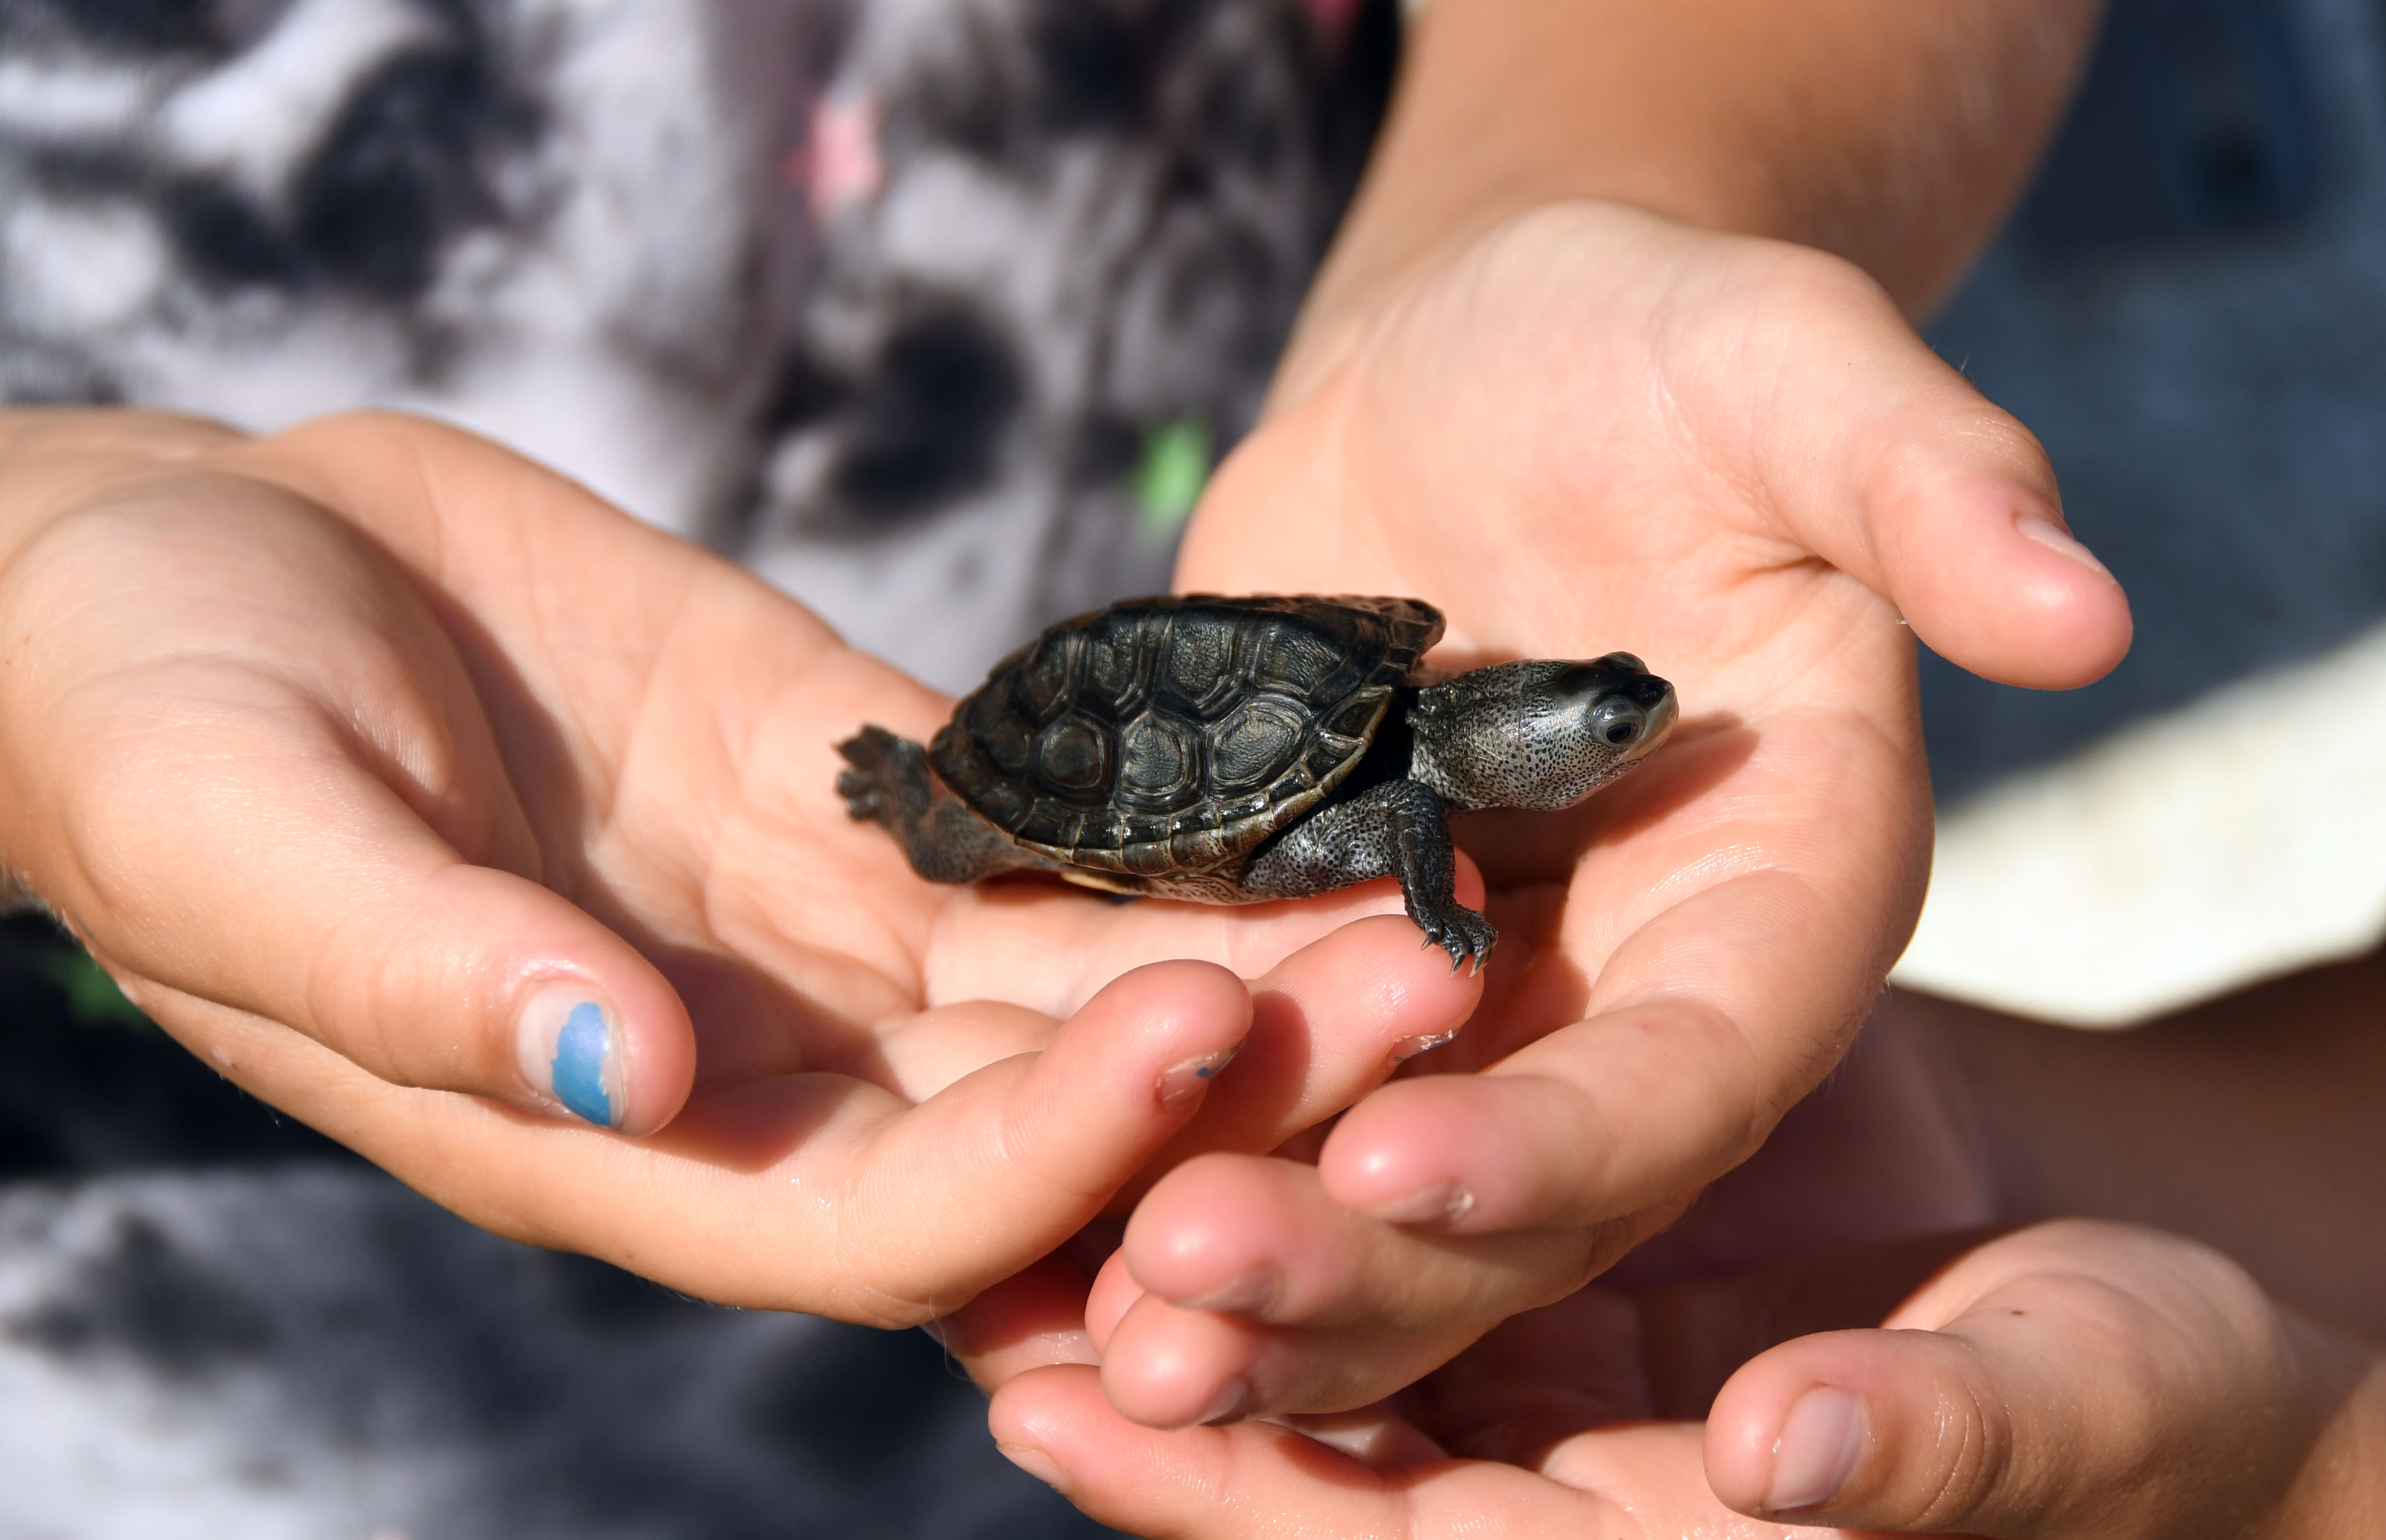 Baby Turtles Are on the Move in Arlington